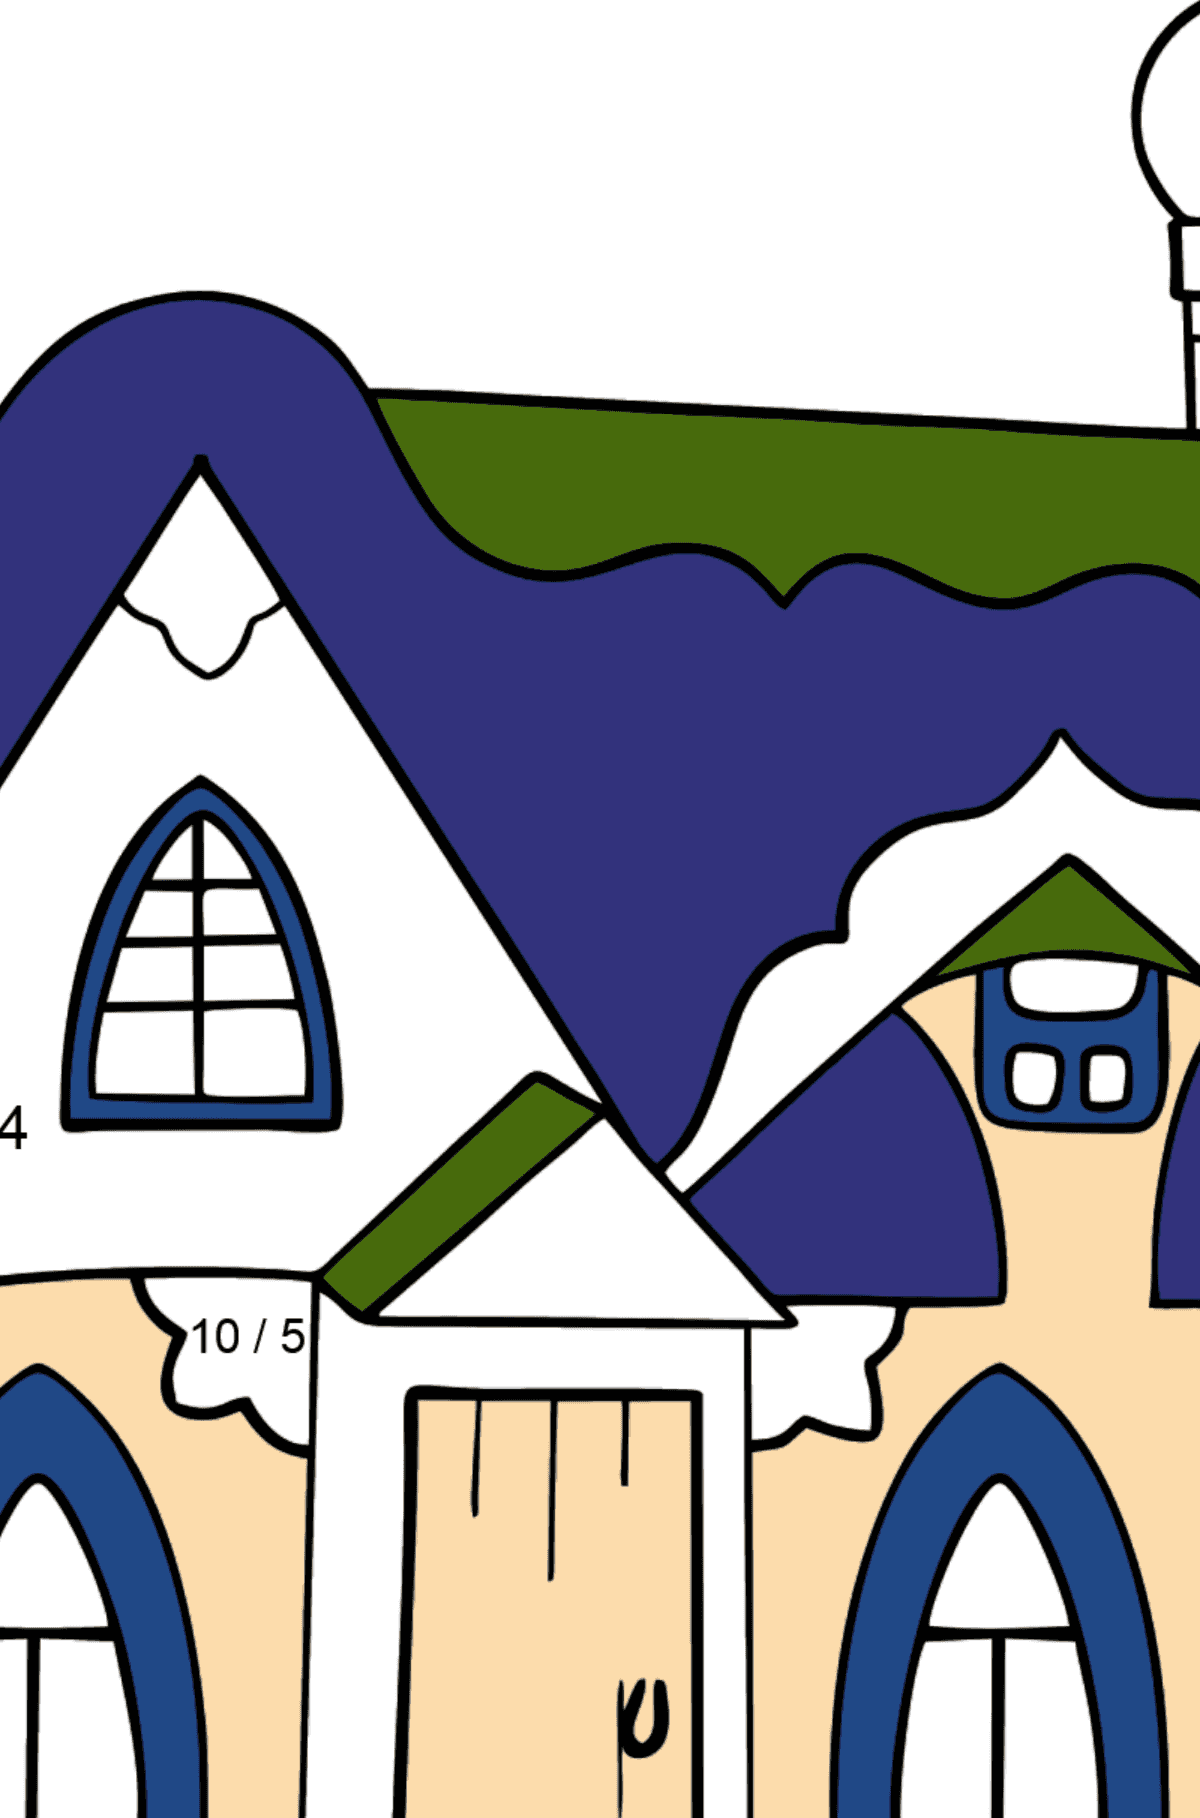 Fairytale House Coloring Page (Easy) - Math Coloring - Division for Kids